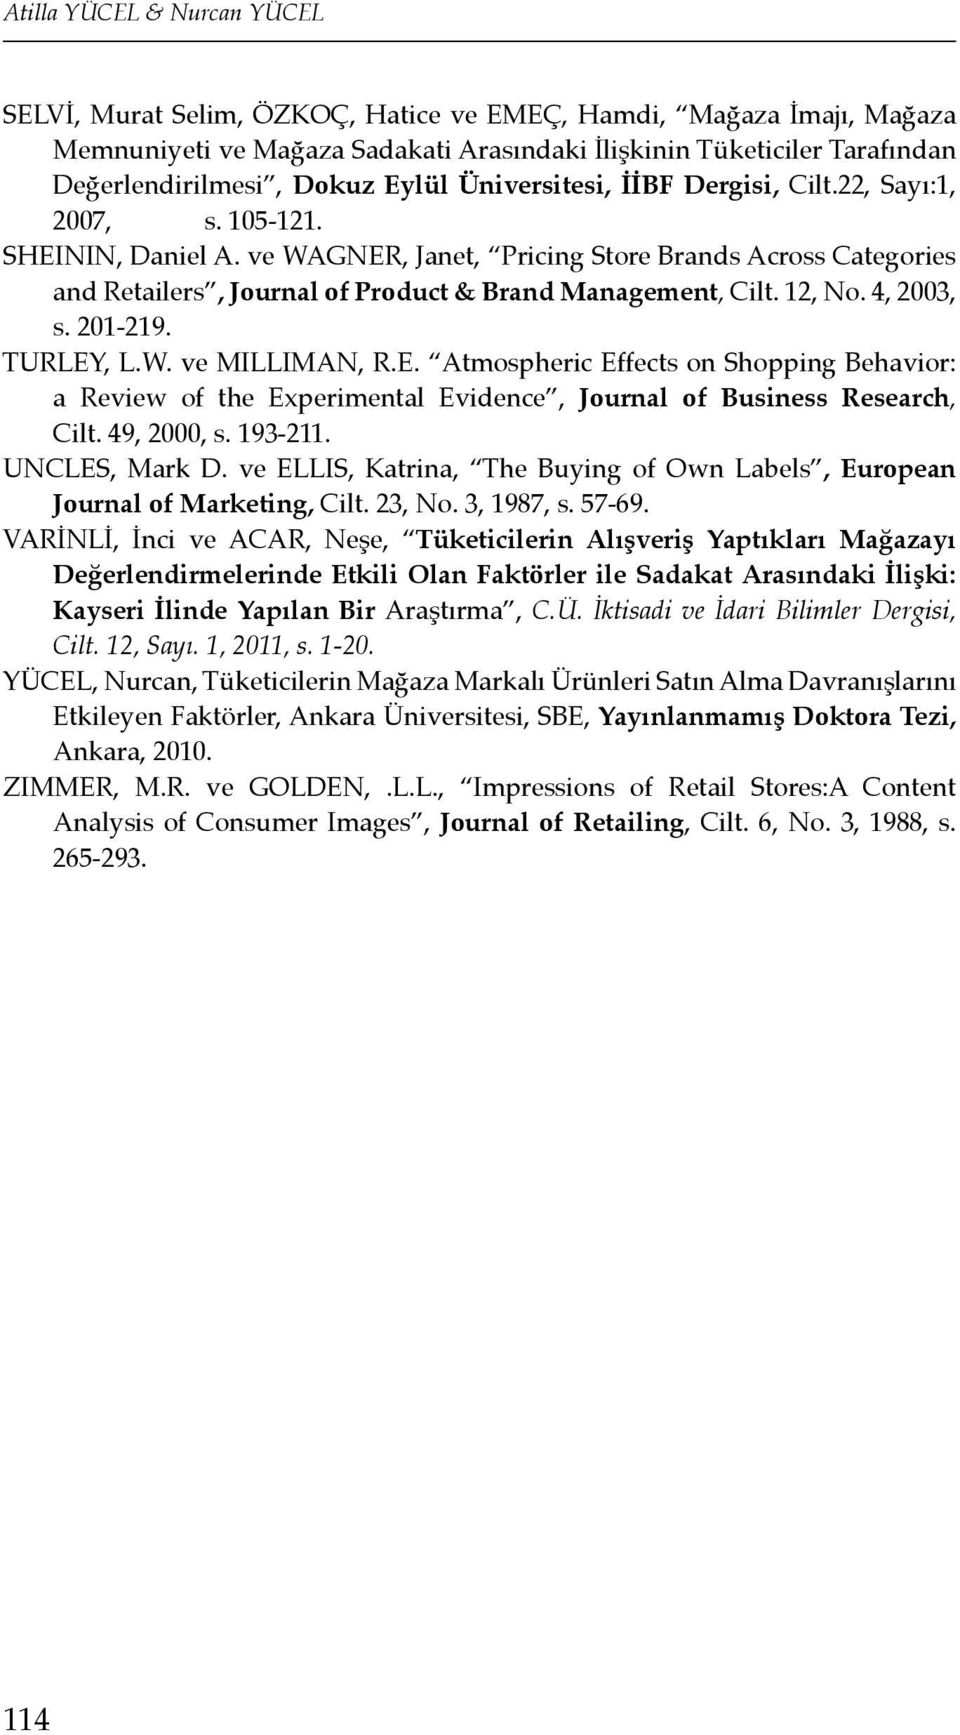 ve WAGNER, Janet, Pricing Store Brands Across Categories and Retailers, Journal of Product & Brand Management, Cilt. 12, No. 4, 2003, s. 201-219. TURLEY, L.W. ve MILLIMAN, R.E. Atmospheric Effects on Shopping Behavior: a Review of the Experimental Evidence, Journal of Business Research, Cilt.